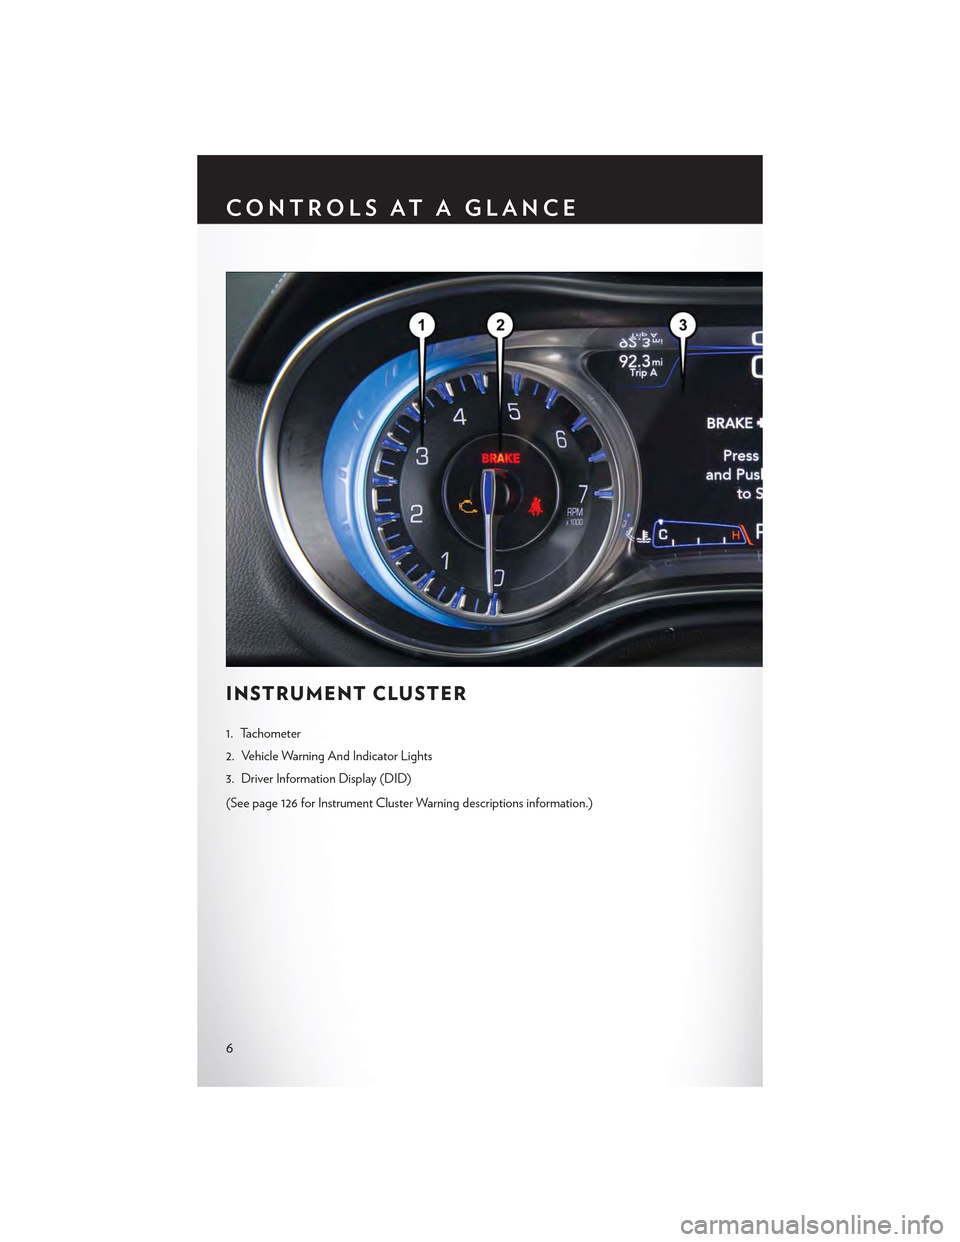 CHRYSLER 300 2015 2.G User Guide INSTRUMENT CLUSTER
1. Tachometer
2. Vehicle Warning And Indicator Lights
3. Driver Information Display (DID)
(See page 126 for Instrument Cluster Warning descriptions information.)
CONTROLS AT A GLANC